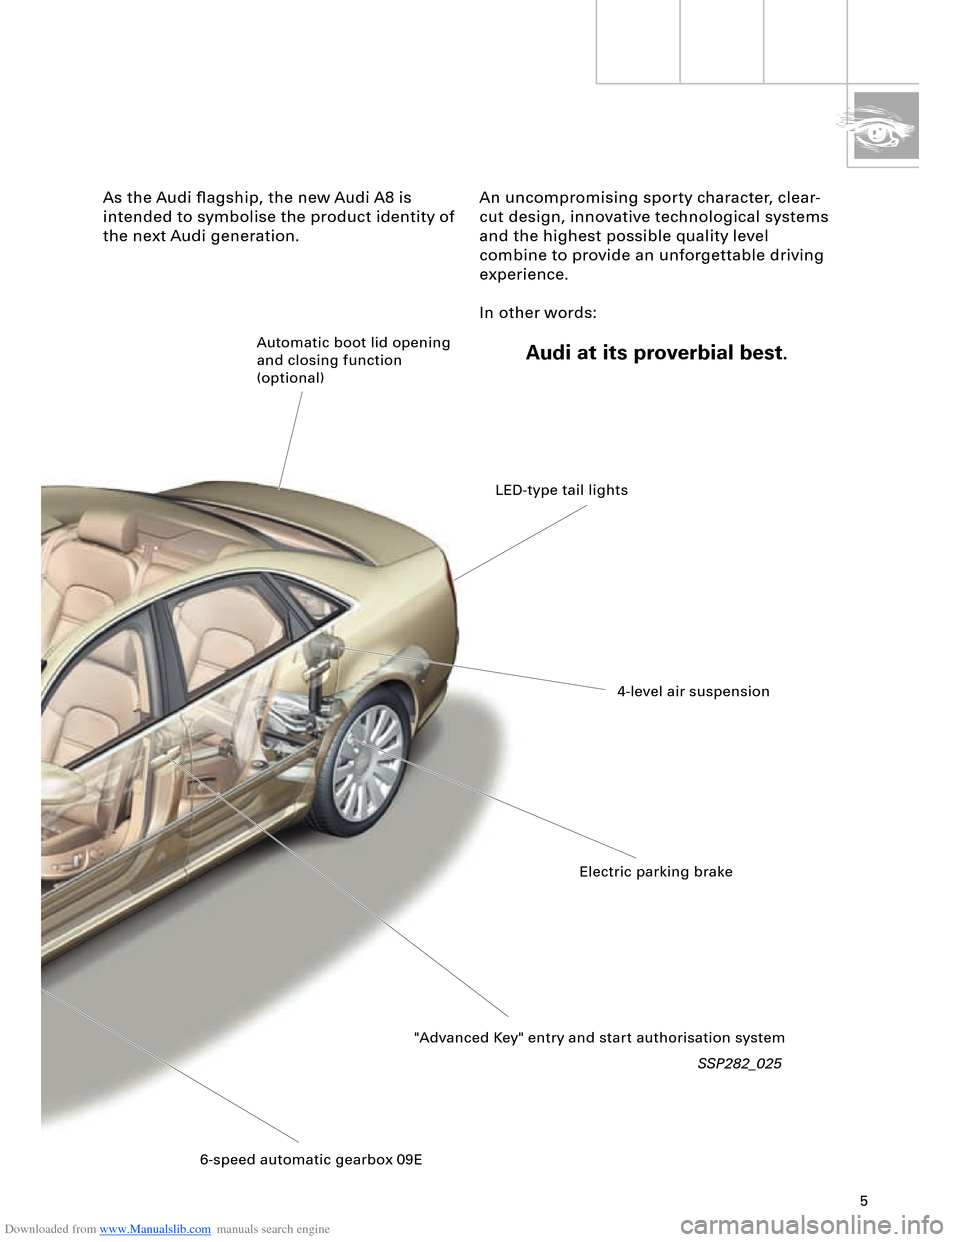 AUDI A8 2003 D3 / 2.G Technical Features Manual Downloaded from www.Manualslib.com manuals search engine 5
SSP282_025
As the Audi ﬂagship, the new Audi A8 is 
intended to symbolise the product identity of 
the next Audi generation.An uncompromisi